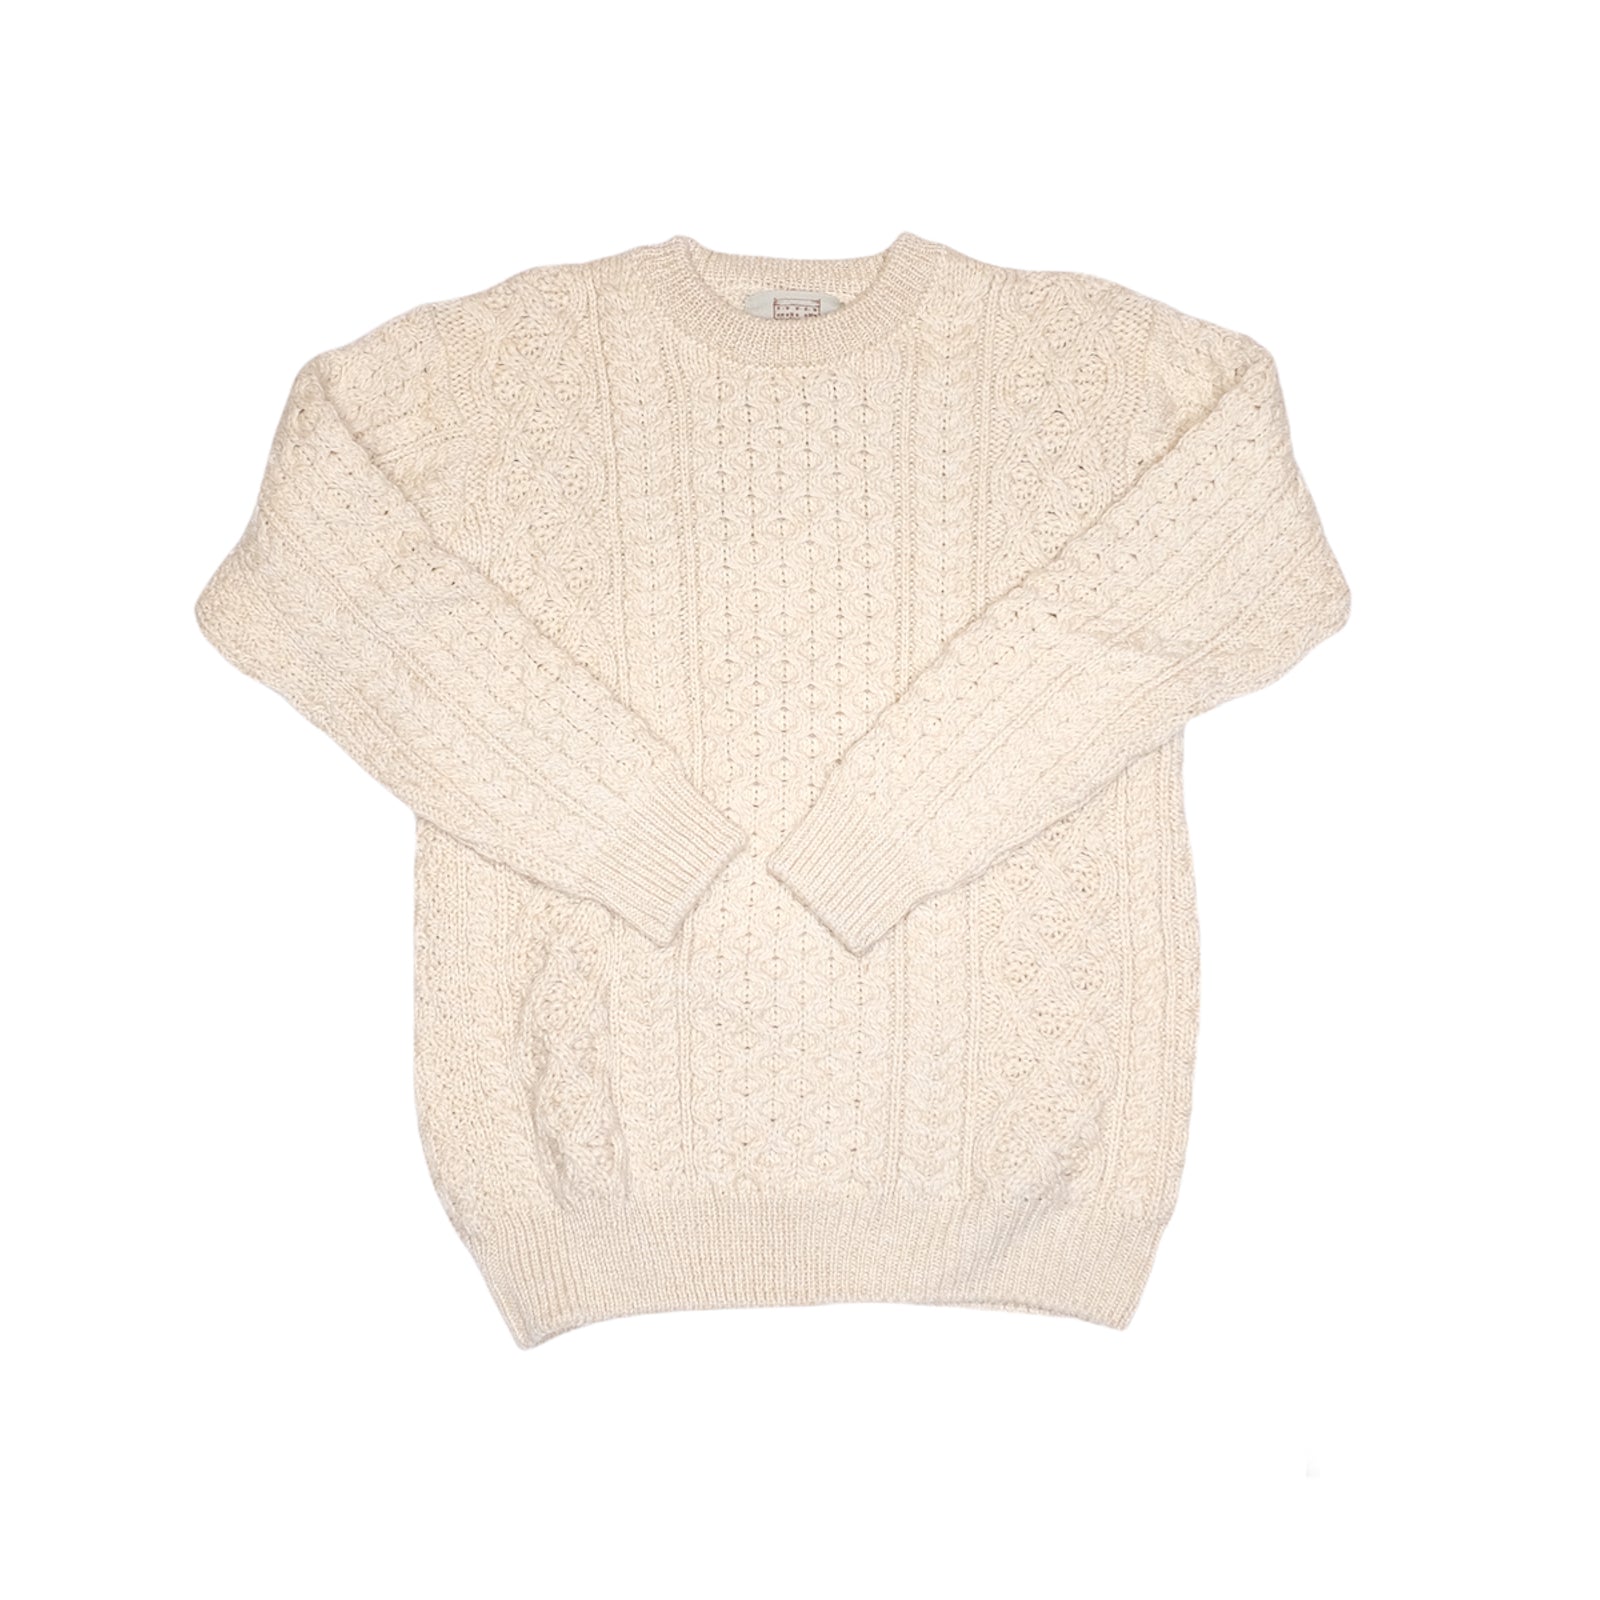 Vintage Cream Cable-knit Sweater